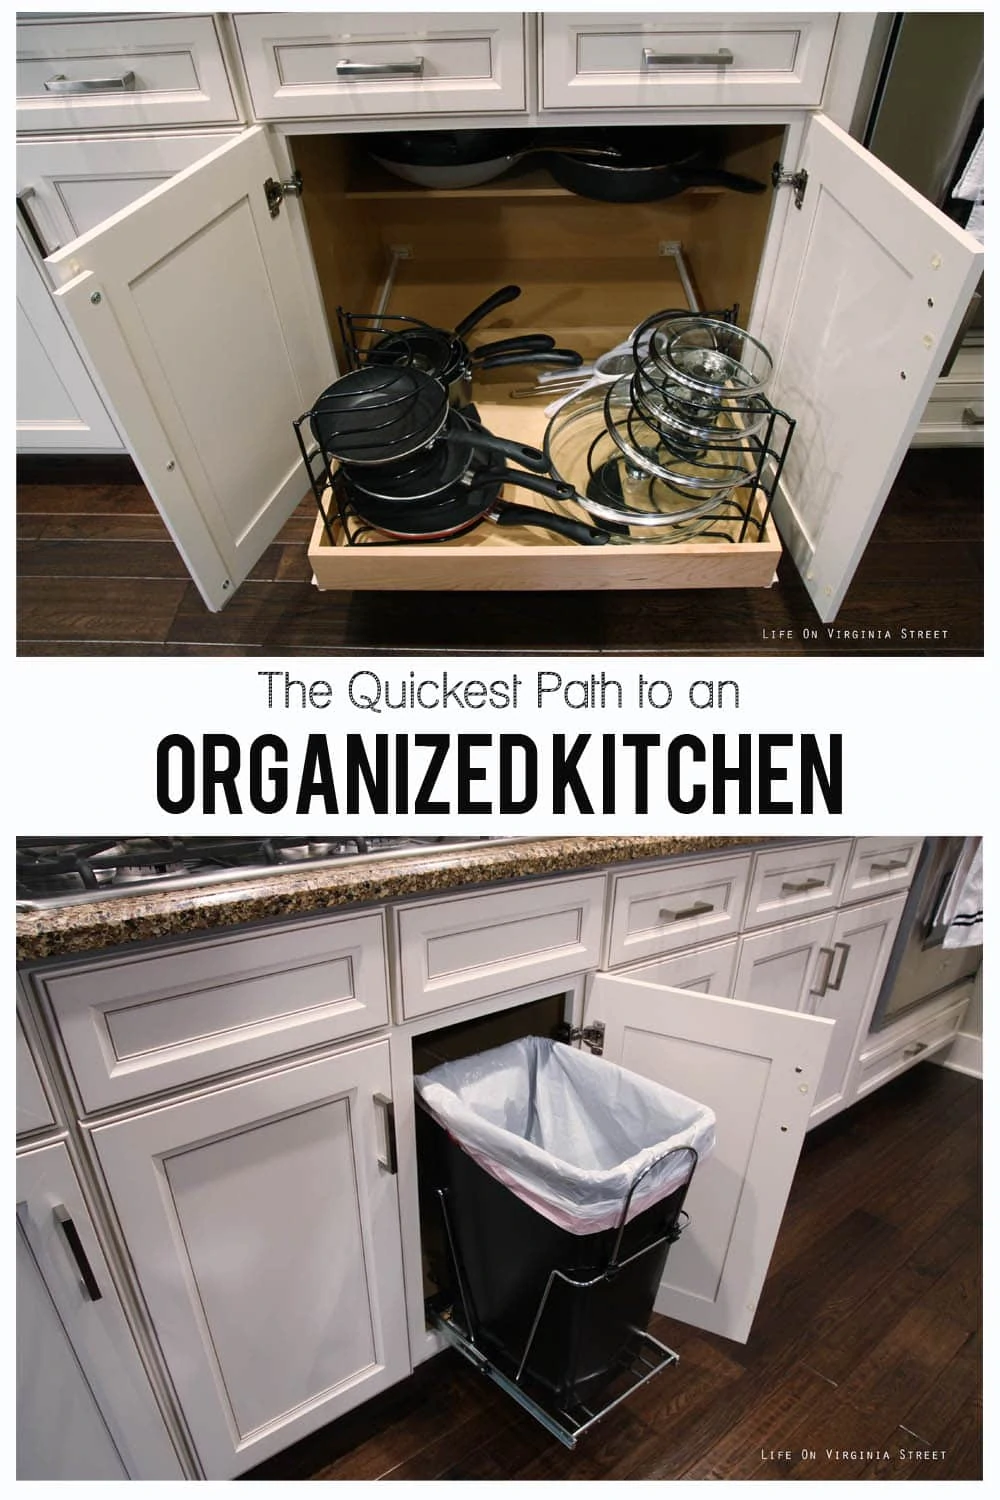 The Quickest Path to an Organized Kitchen